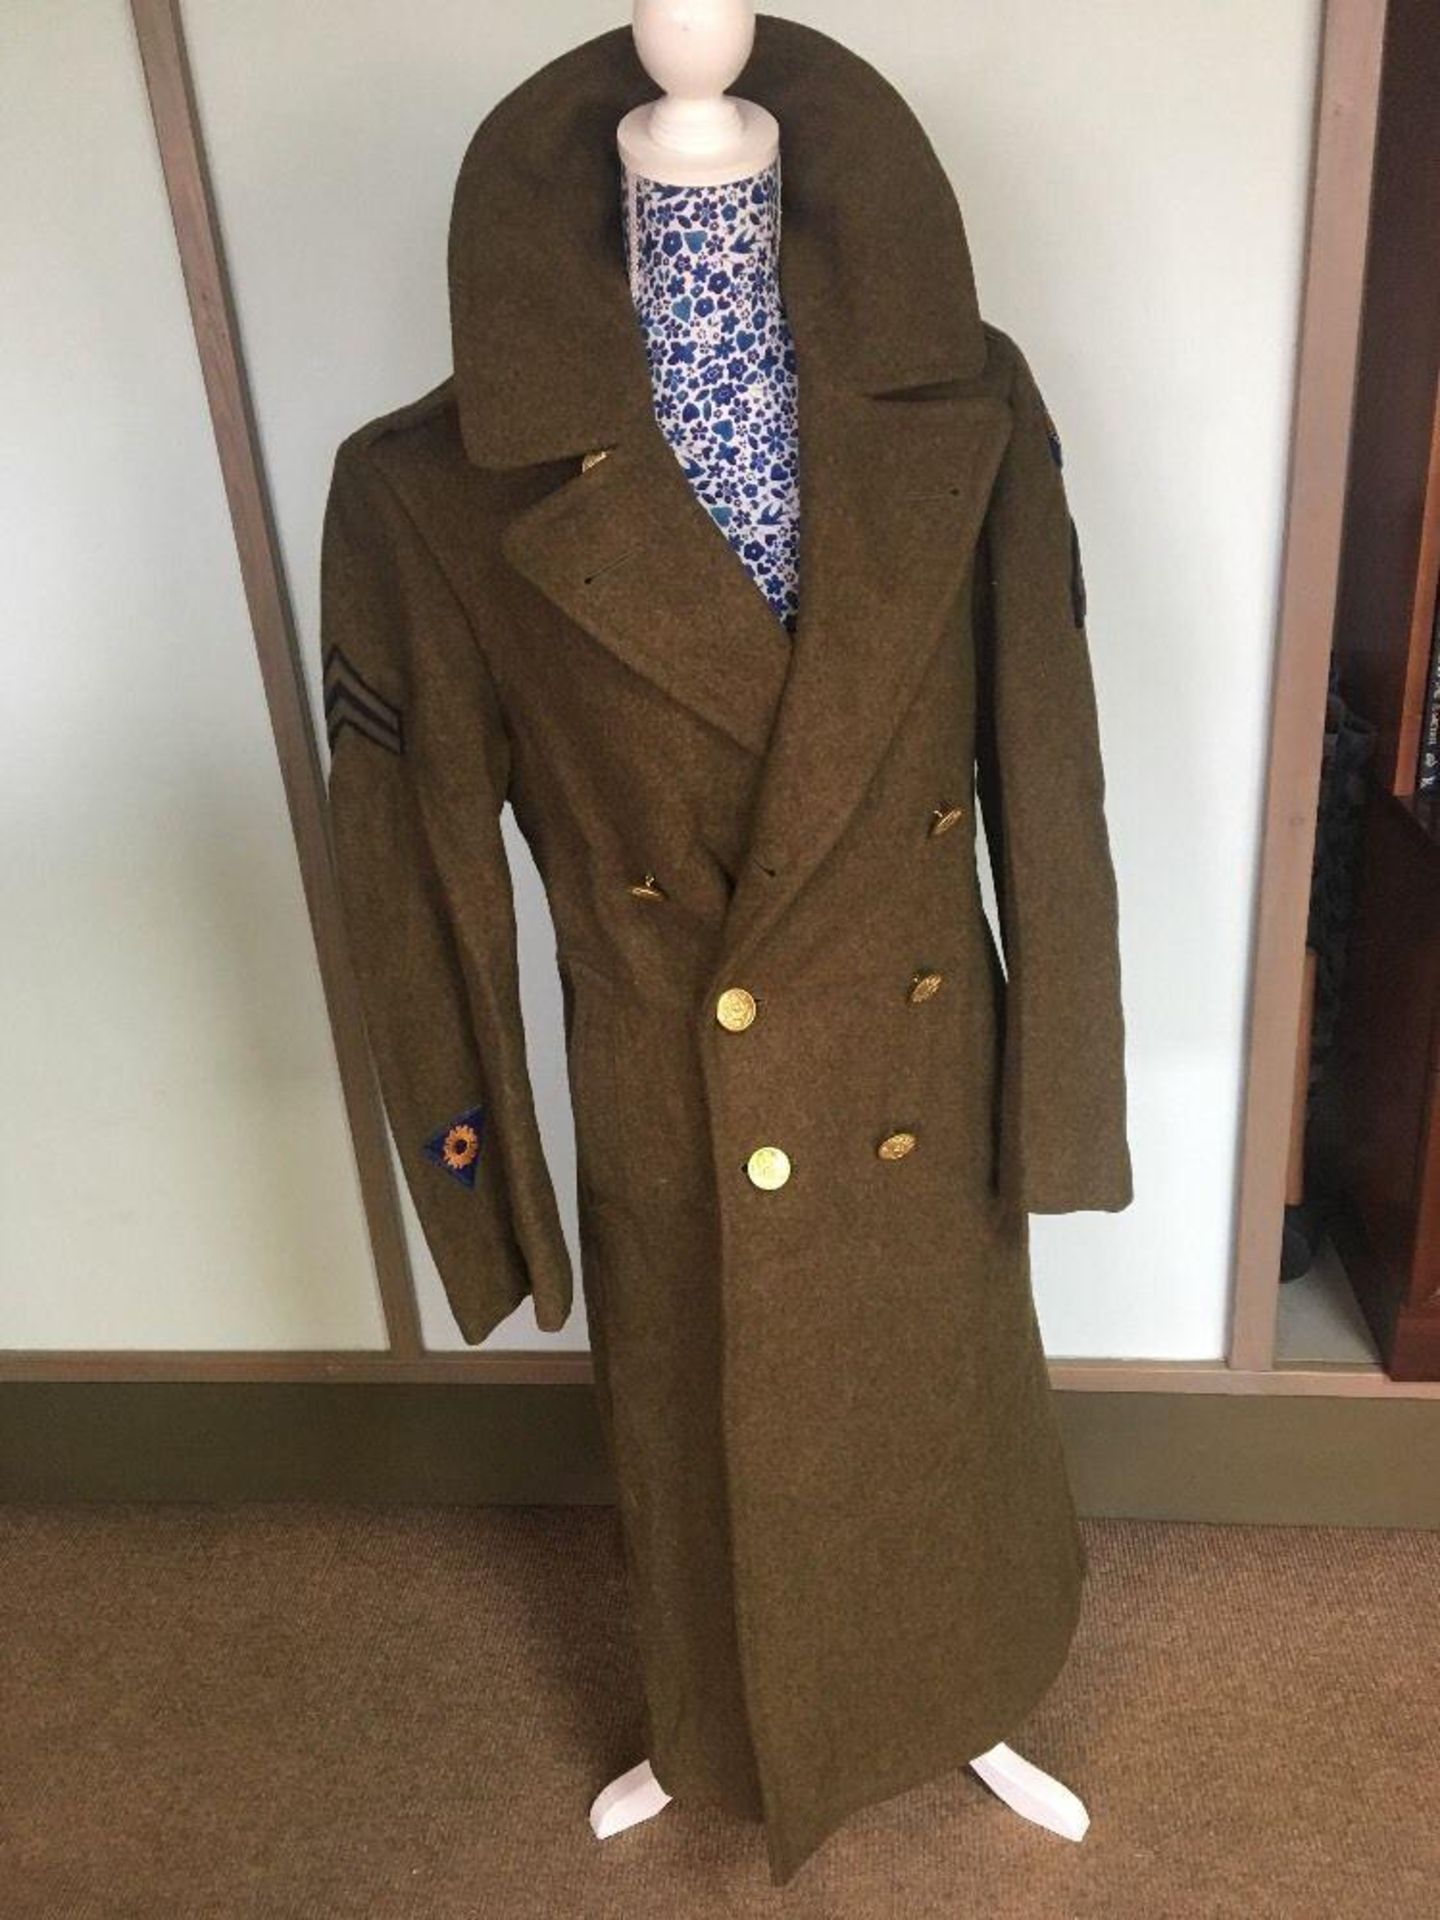 1940s WW2 US Air Force Men's Wool Long Trench Coat Olive Green. Size 34R. Dated 3/11/1940. A genuine